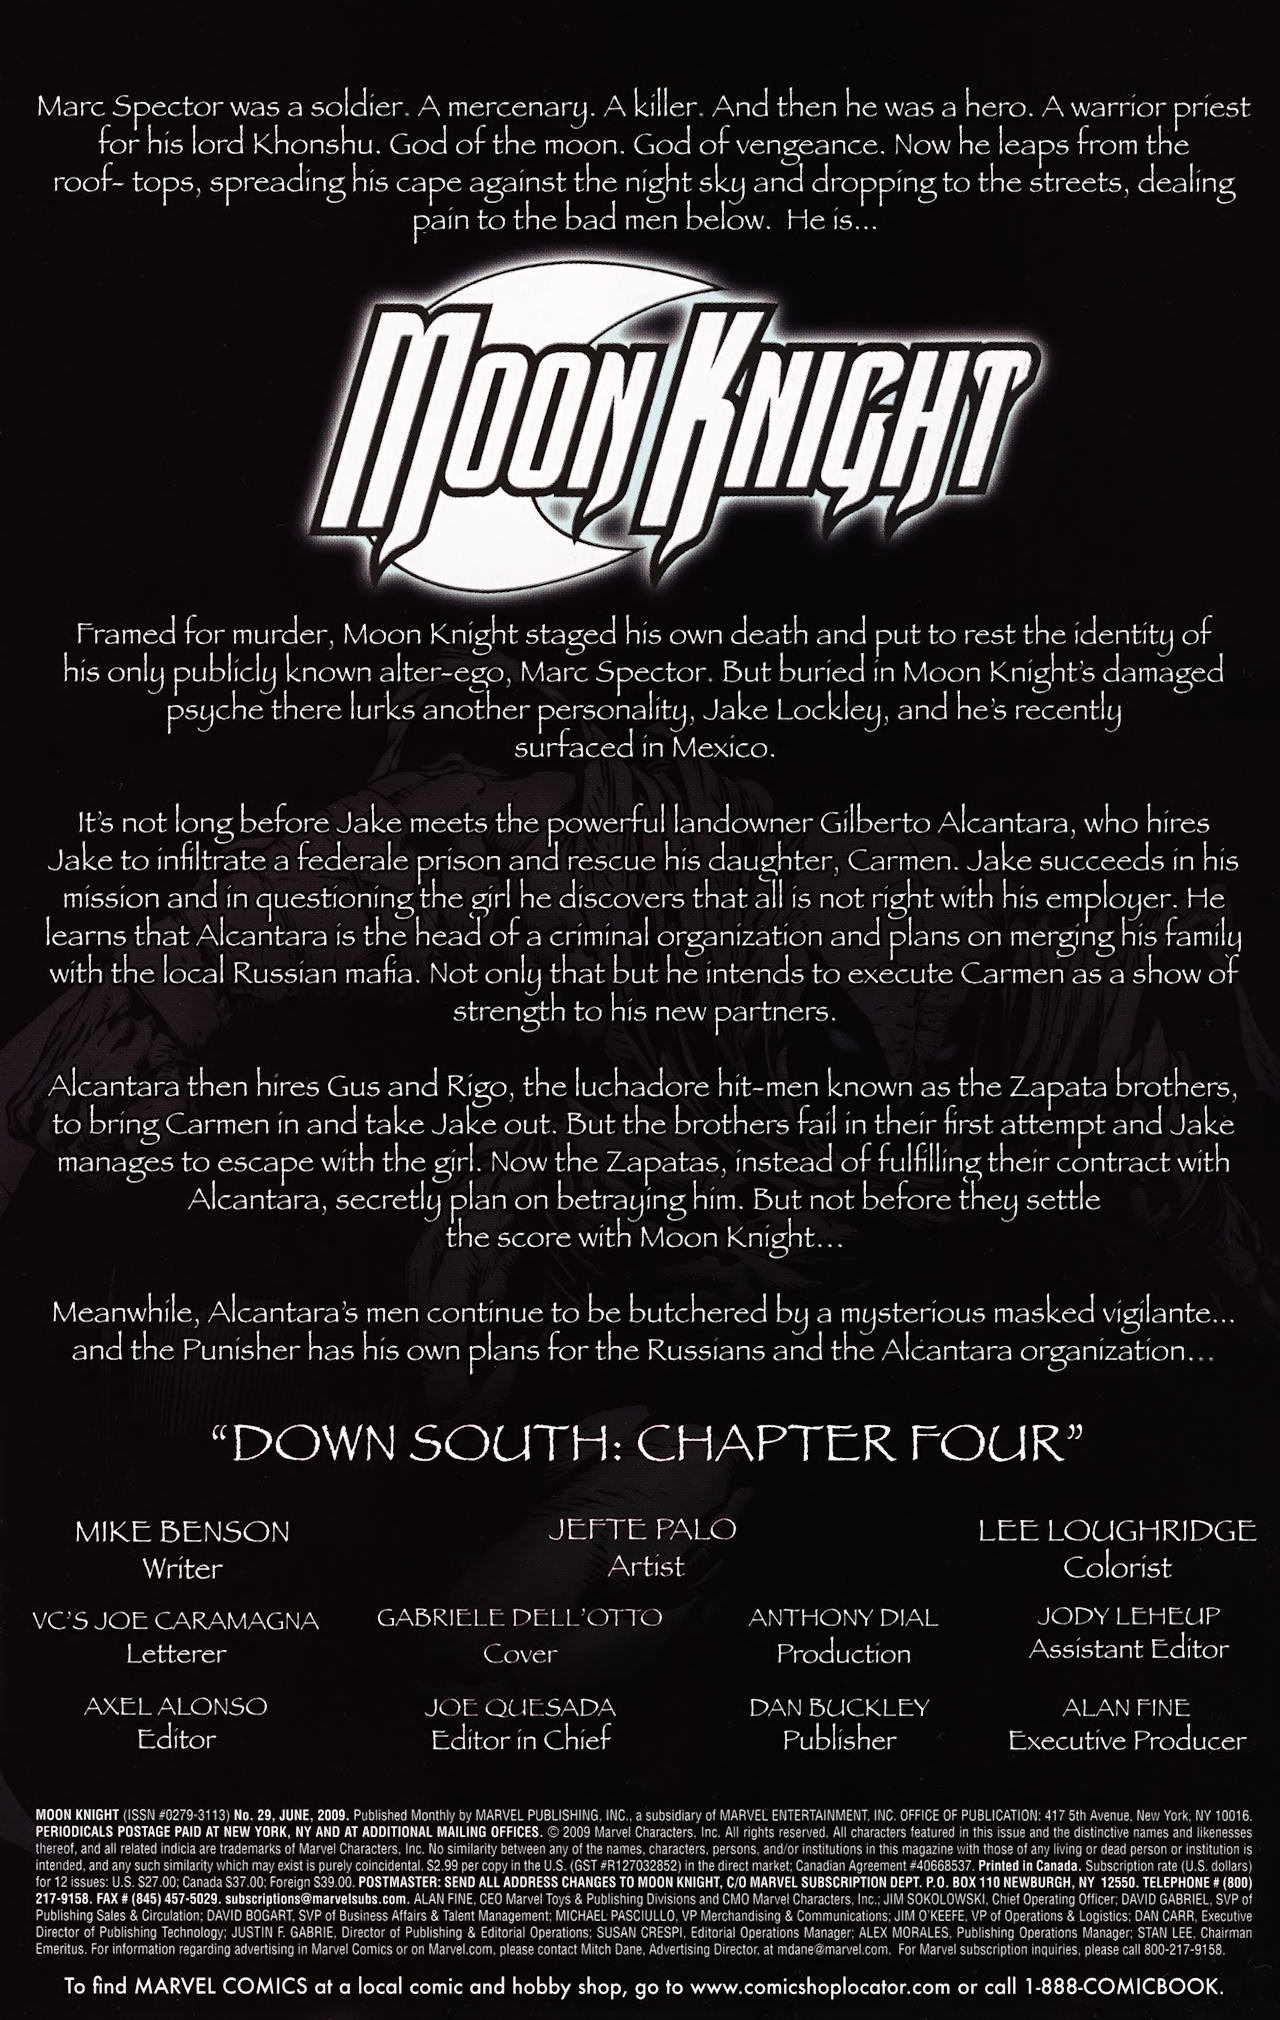 Moon Knight #29 - Down South, Part 4 